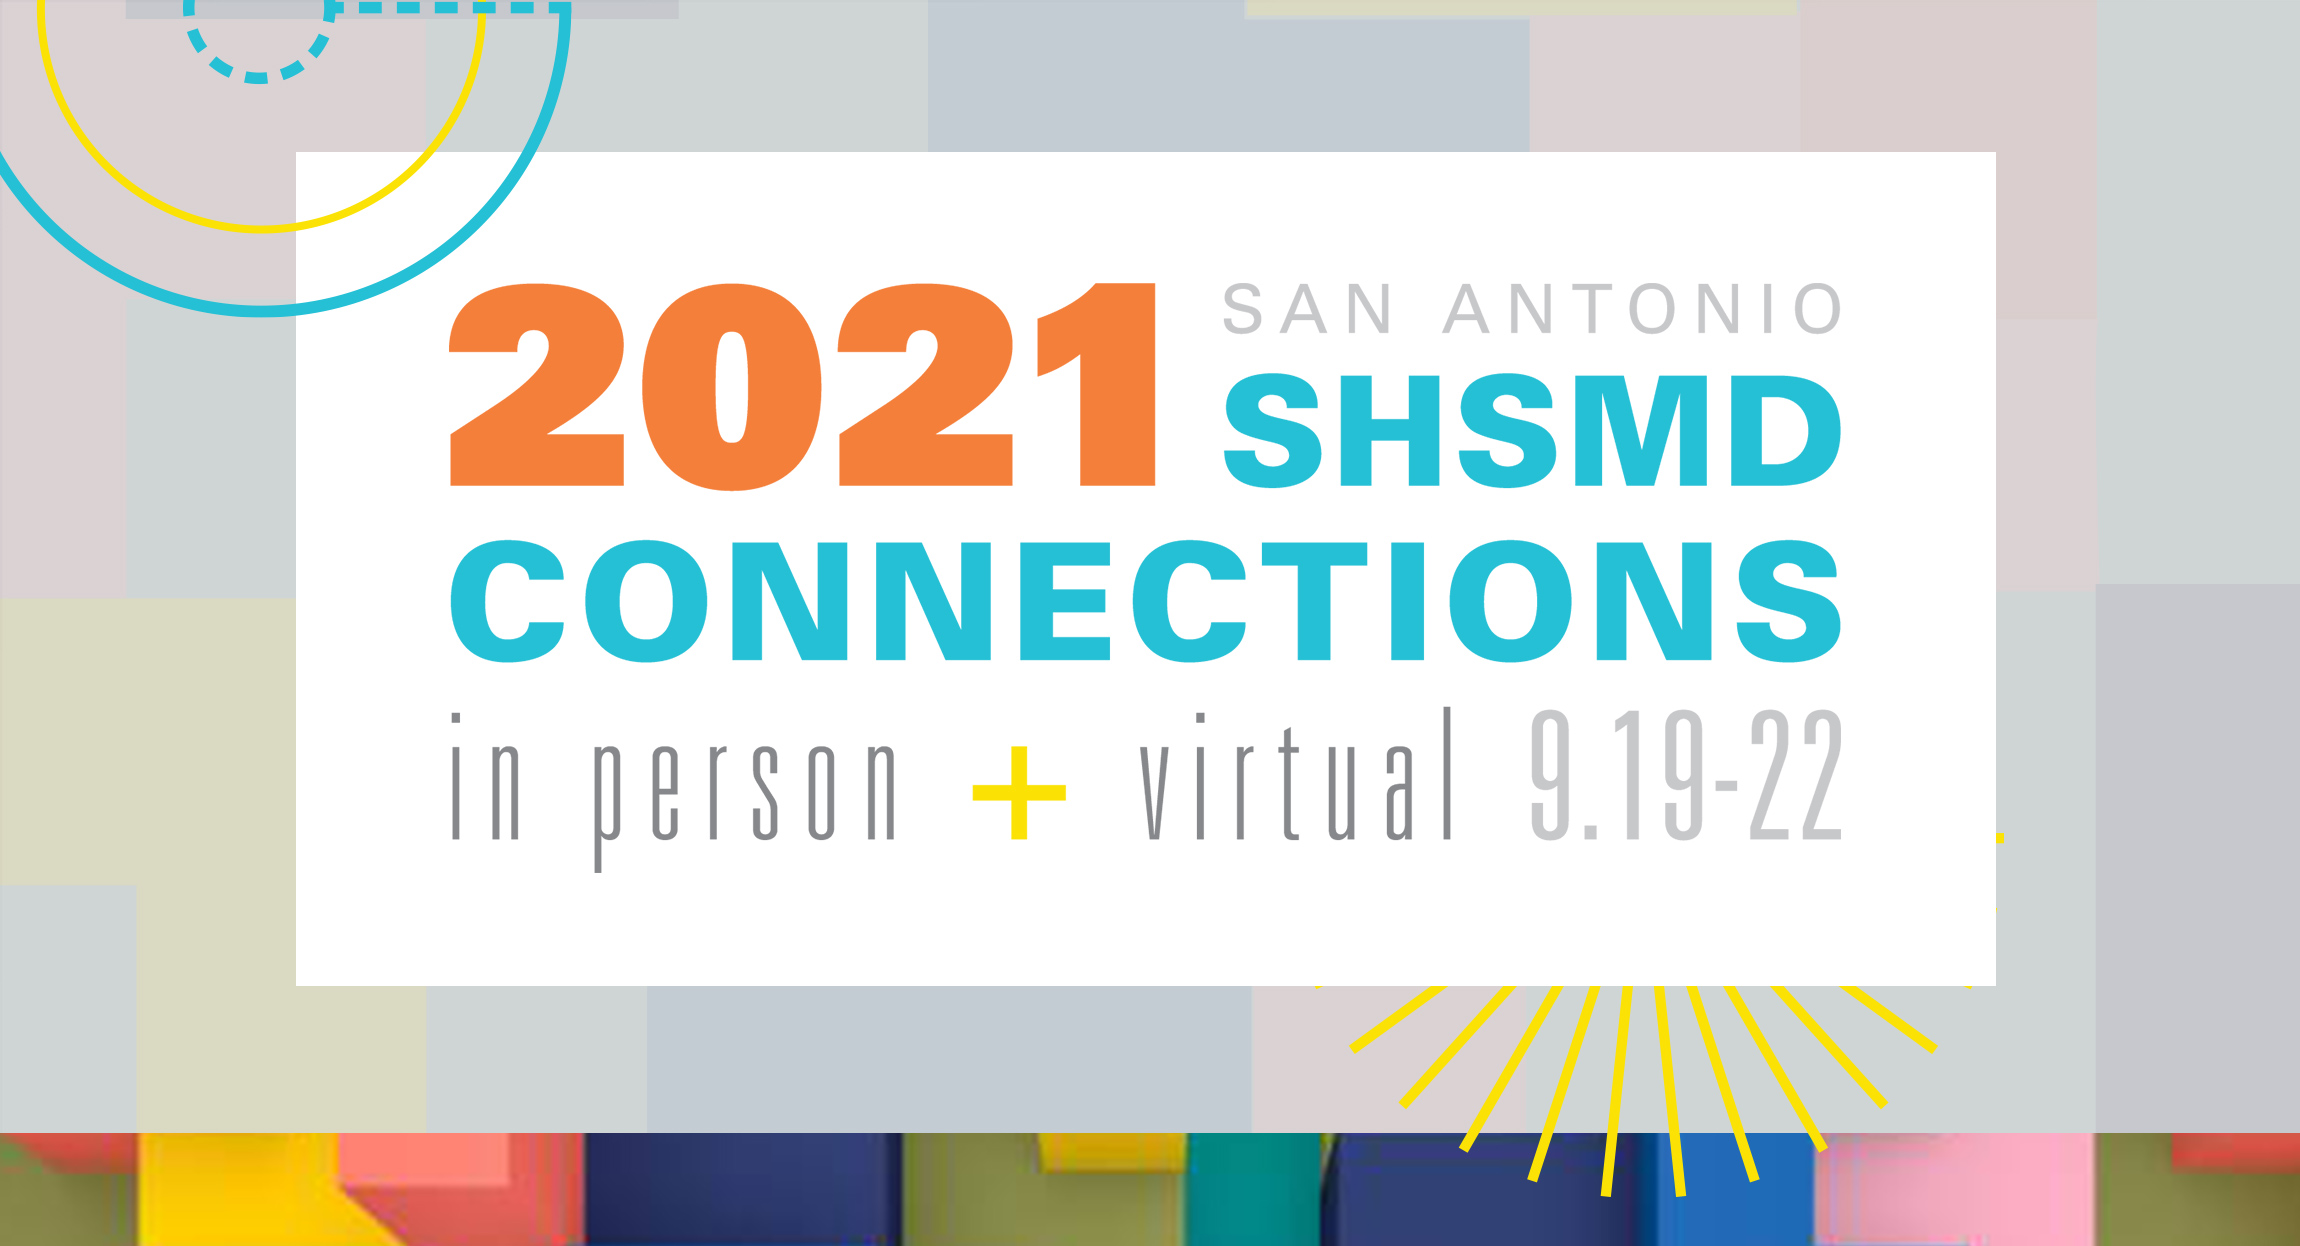 SHSMD 2021 Annual Conference Branding by Hughes Design